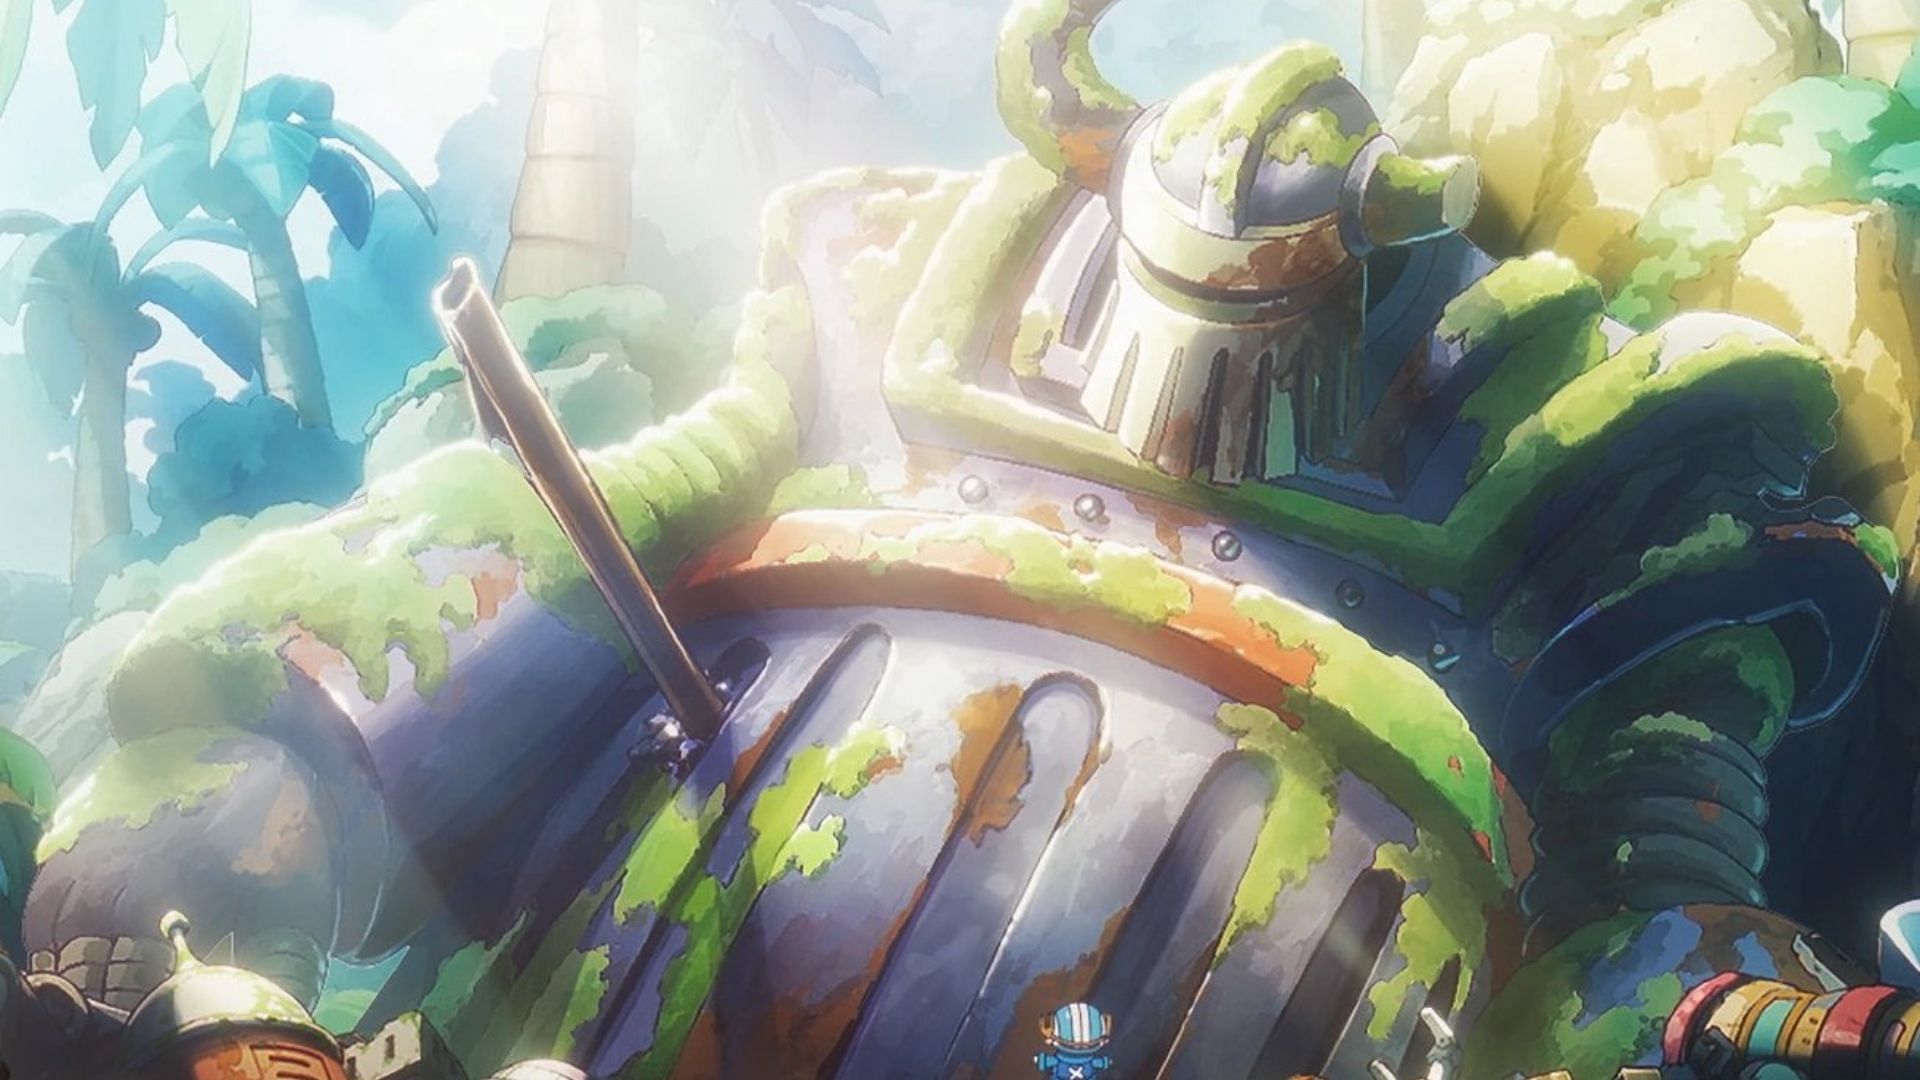 The Iron Giant from One Piece&#039;s Egghead Arc (Image via Toei Animation)